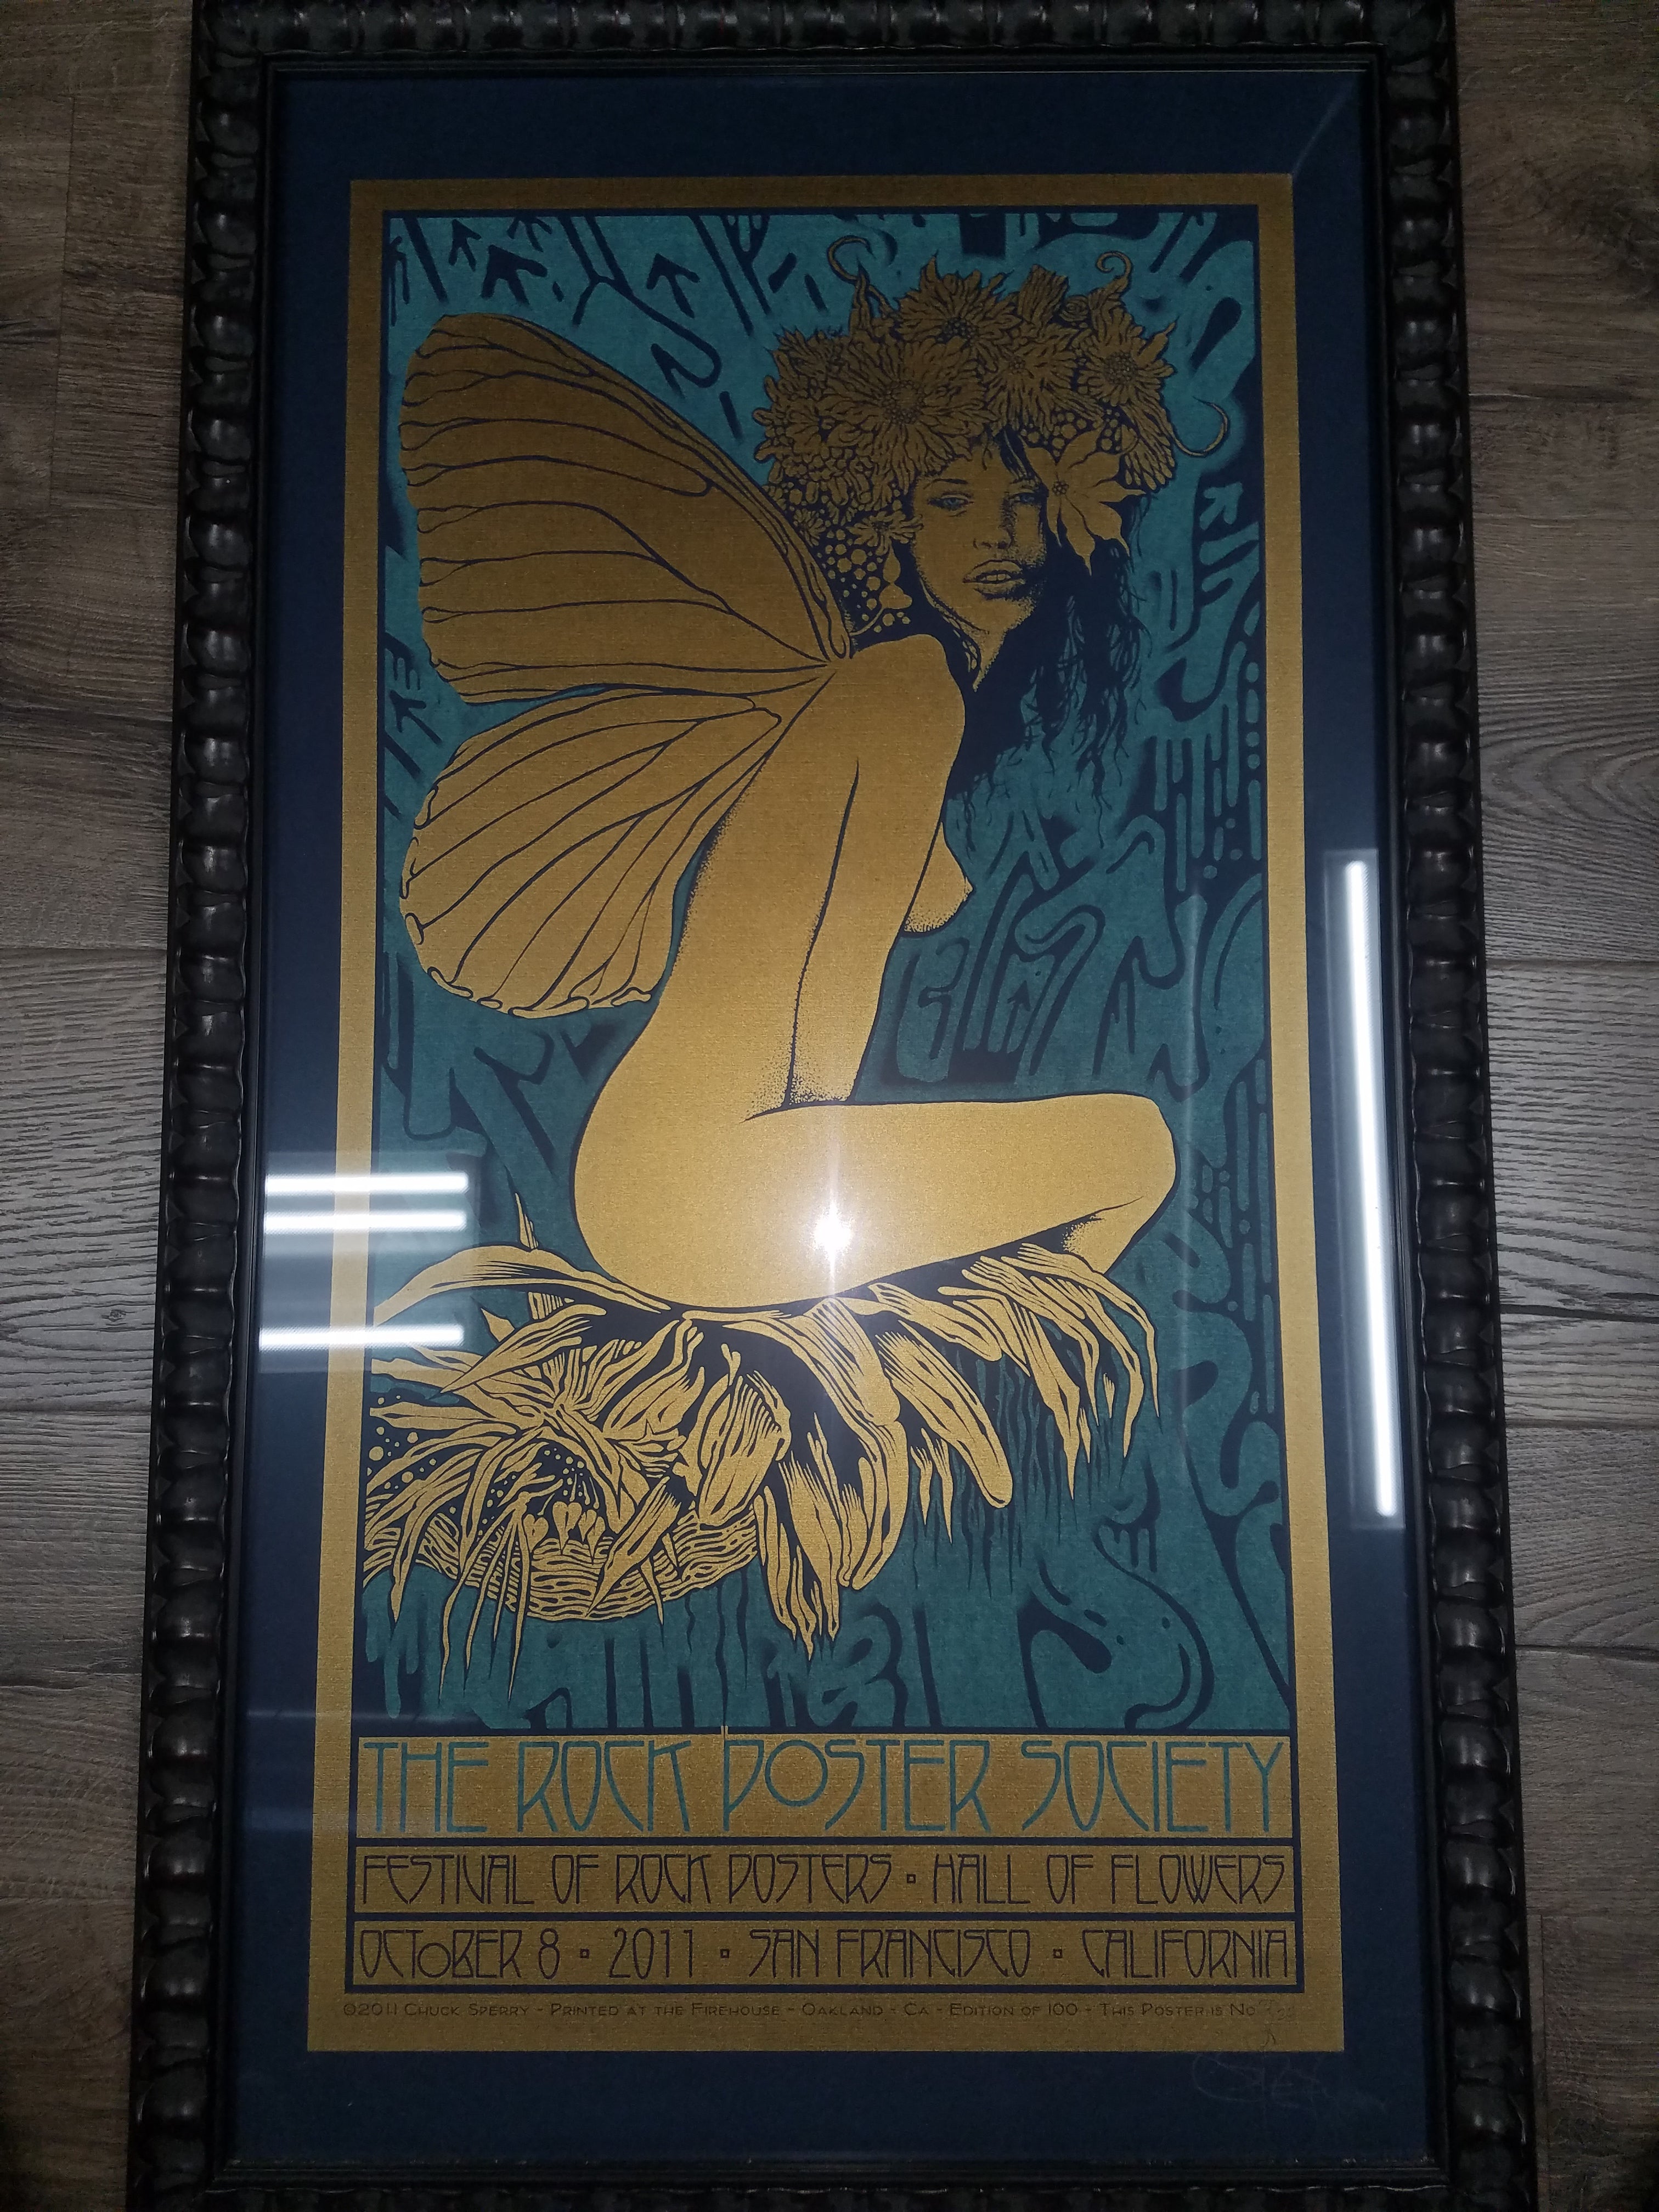 Chuck Sperry The Rock Poster Society TRPS San Francisco 2011 BLUE Variant FRAMED S/N xx/25